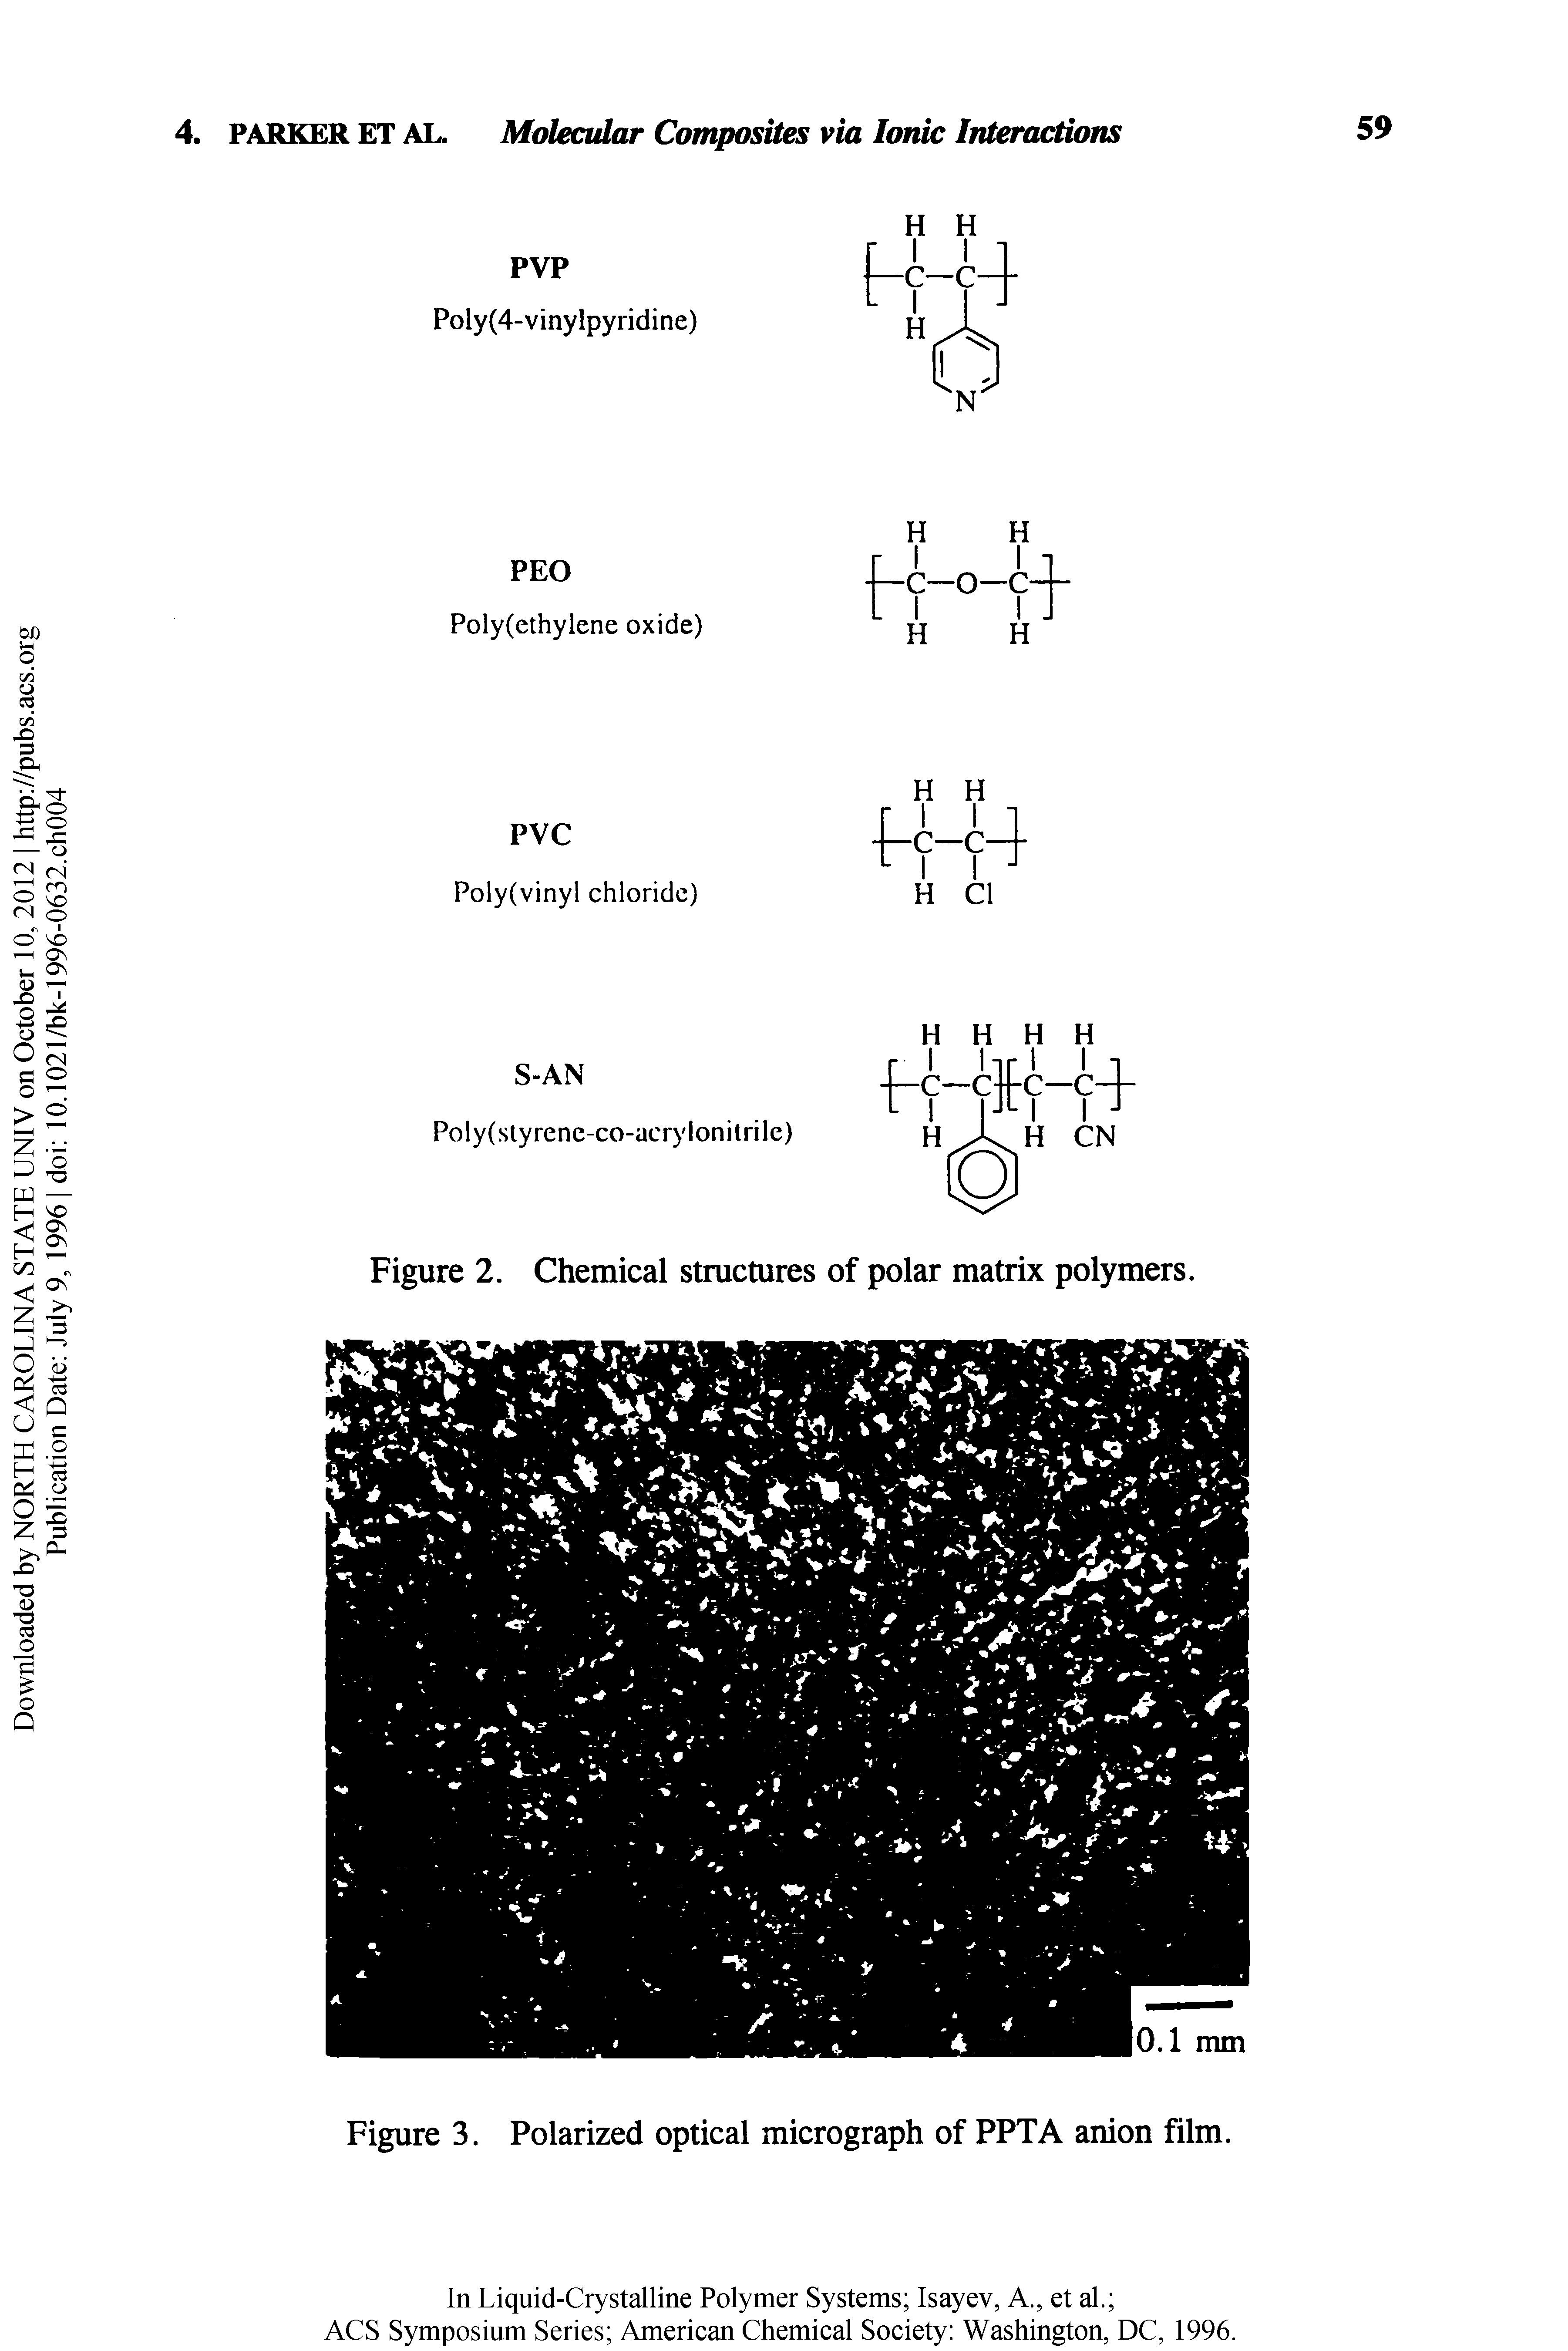 Figure 2. Chemical structures of polar matrix polymers.